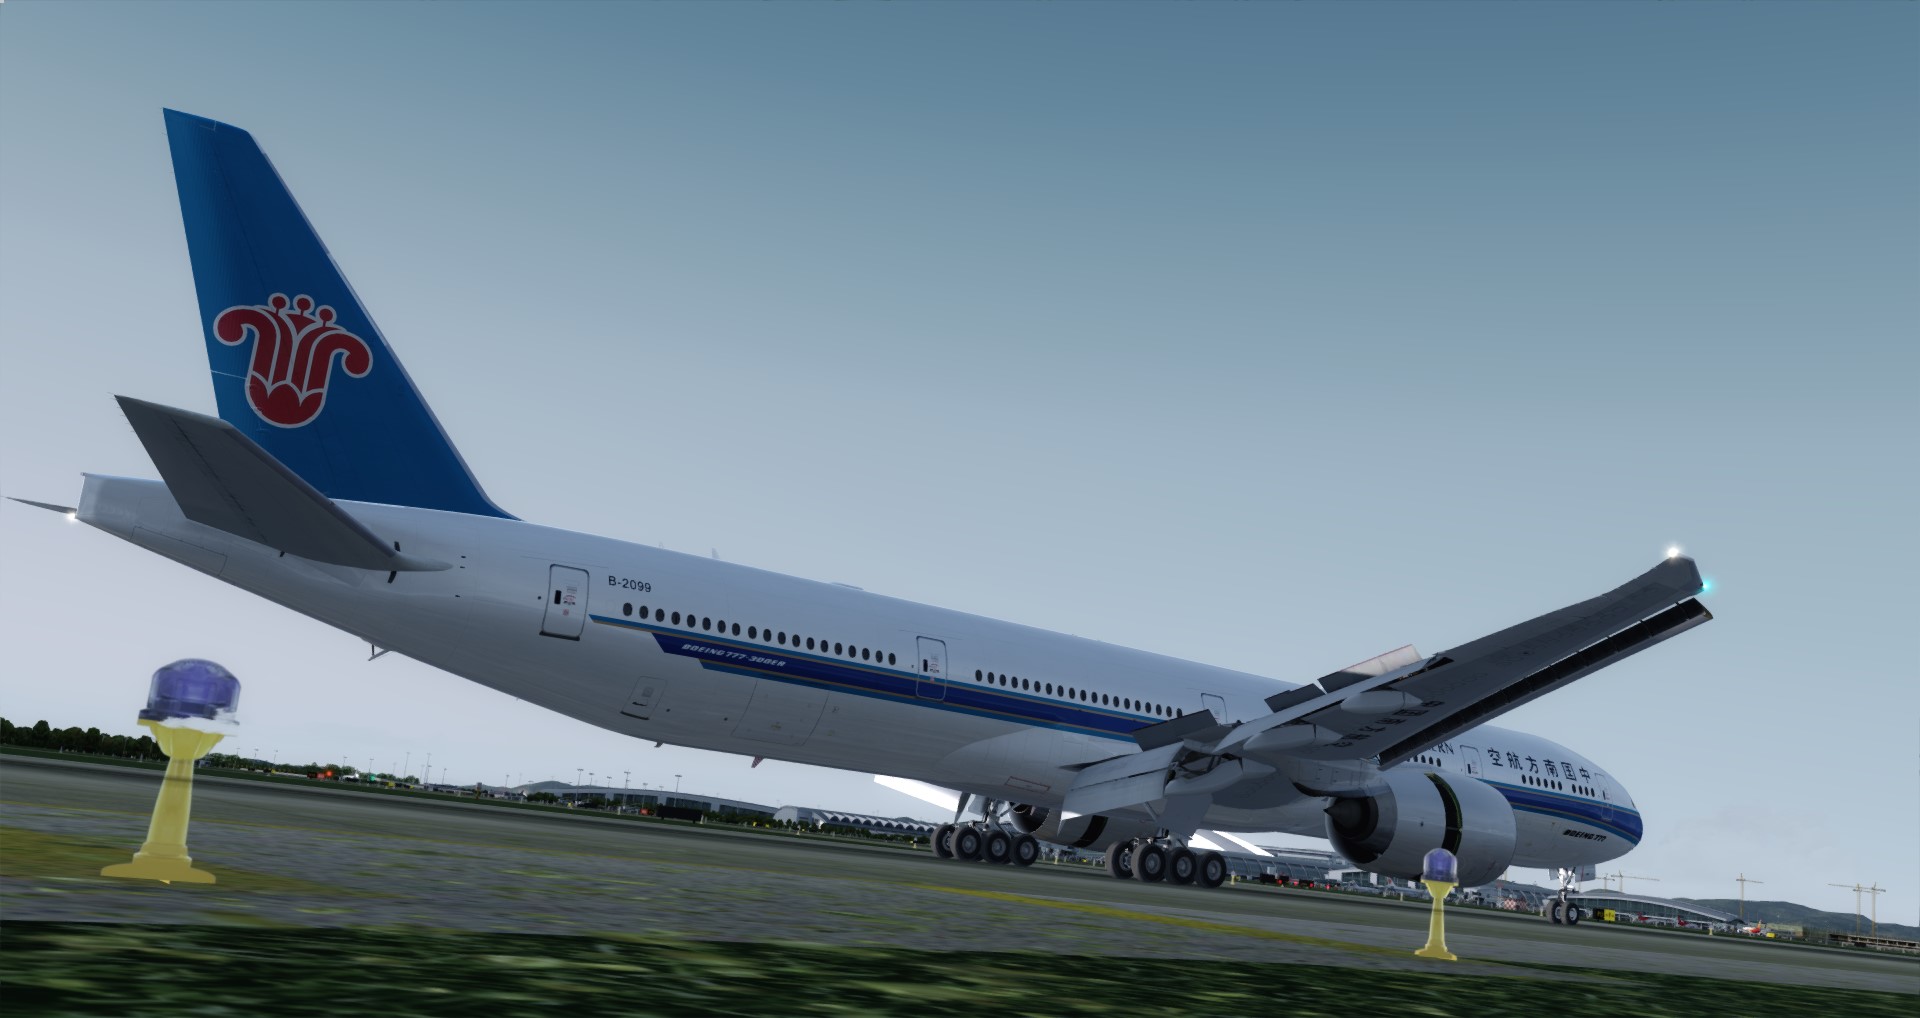 P3D V4 77W China Southern Airlines WADD-ZGGG 营救同胞-1344 